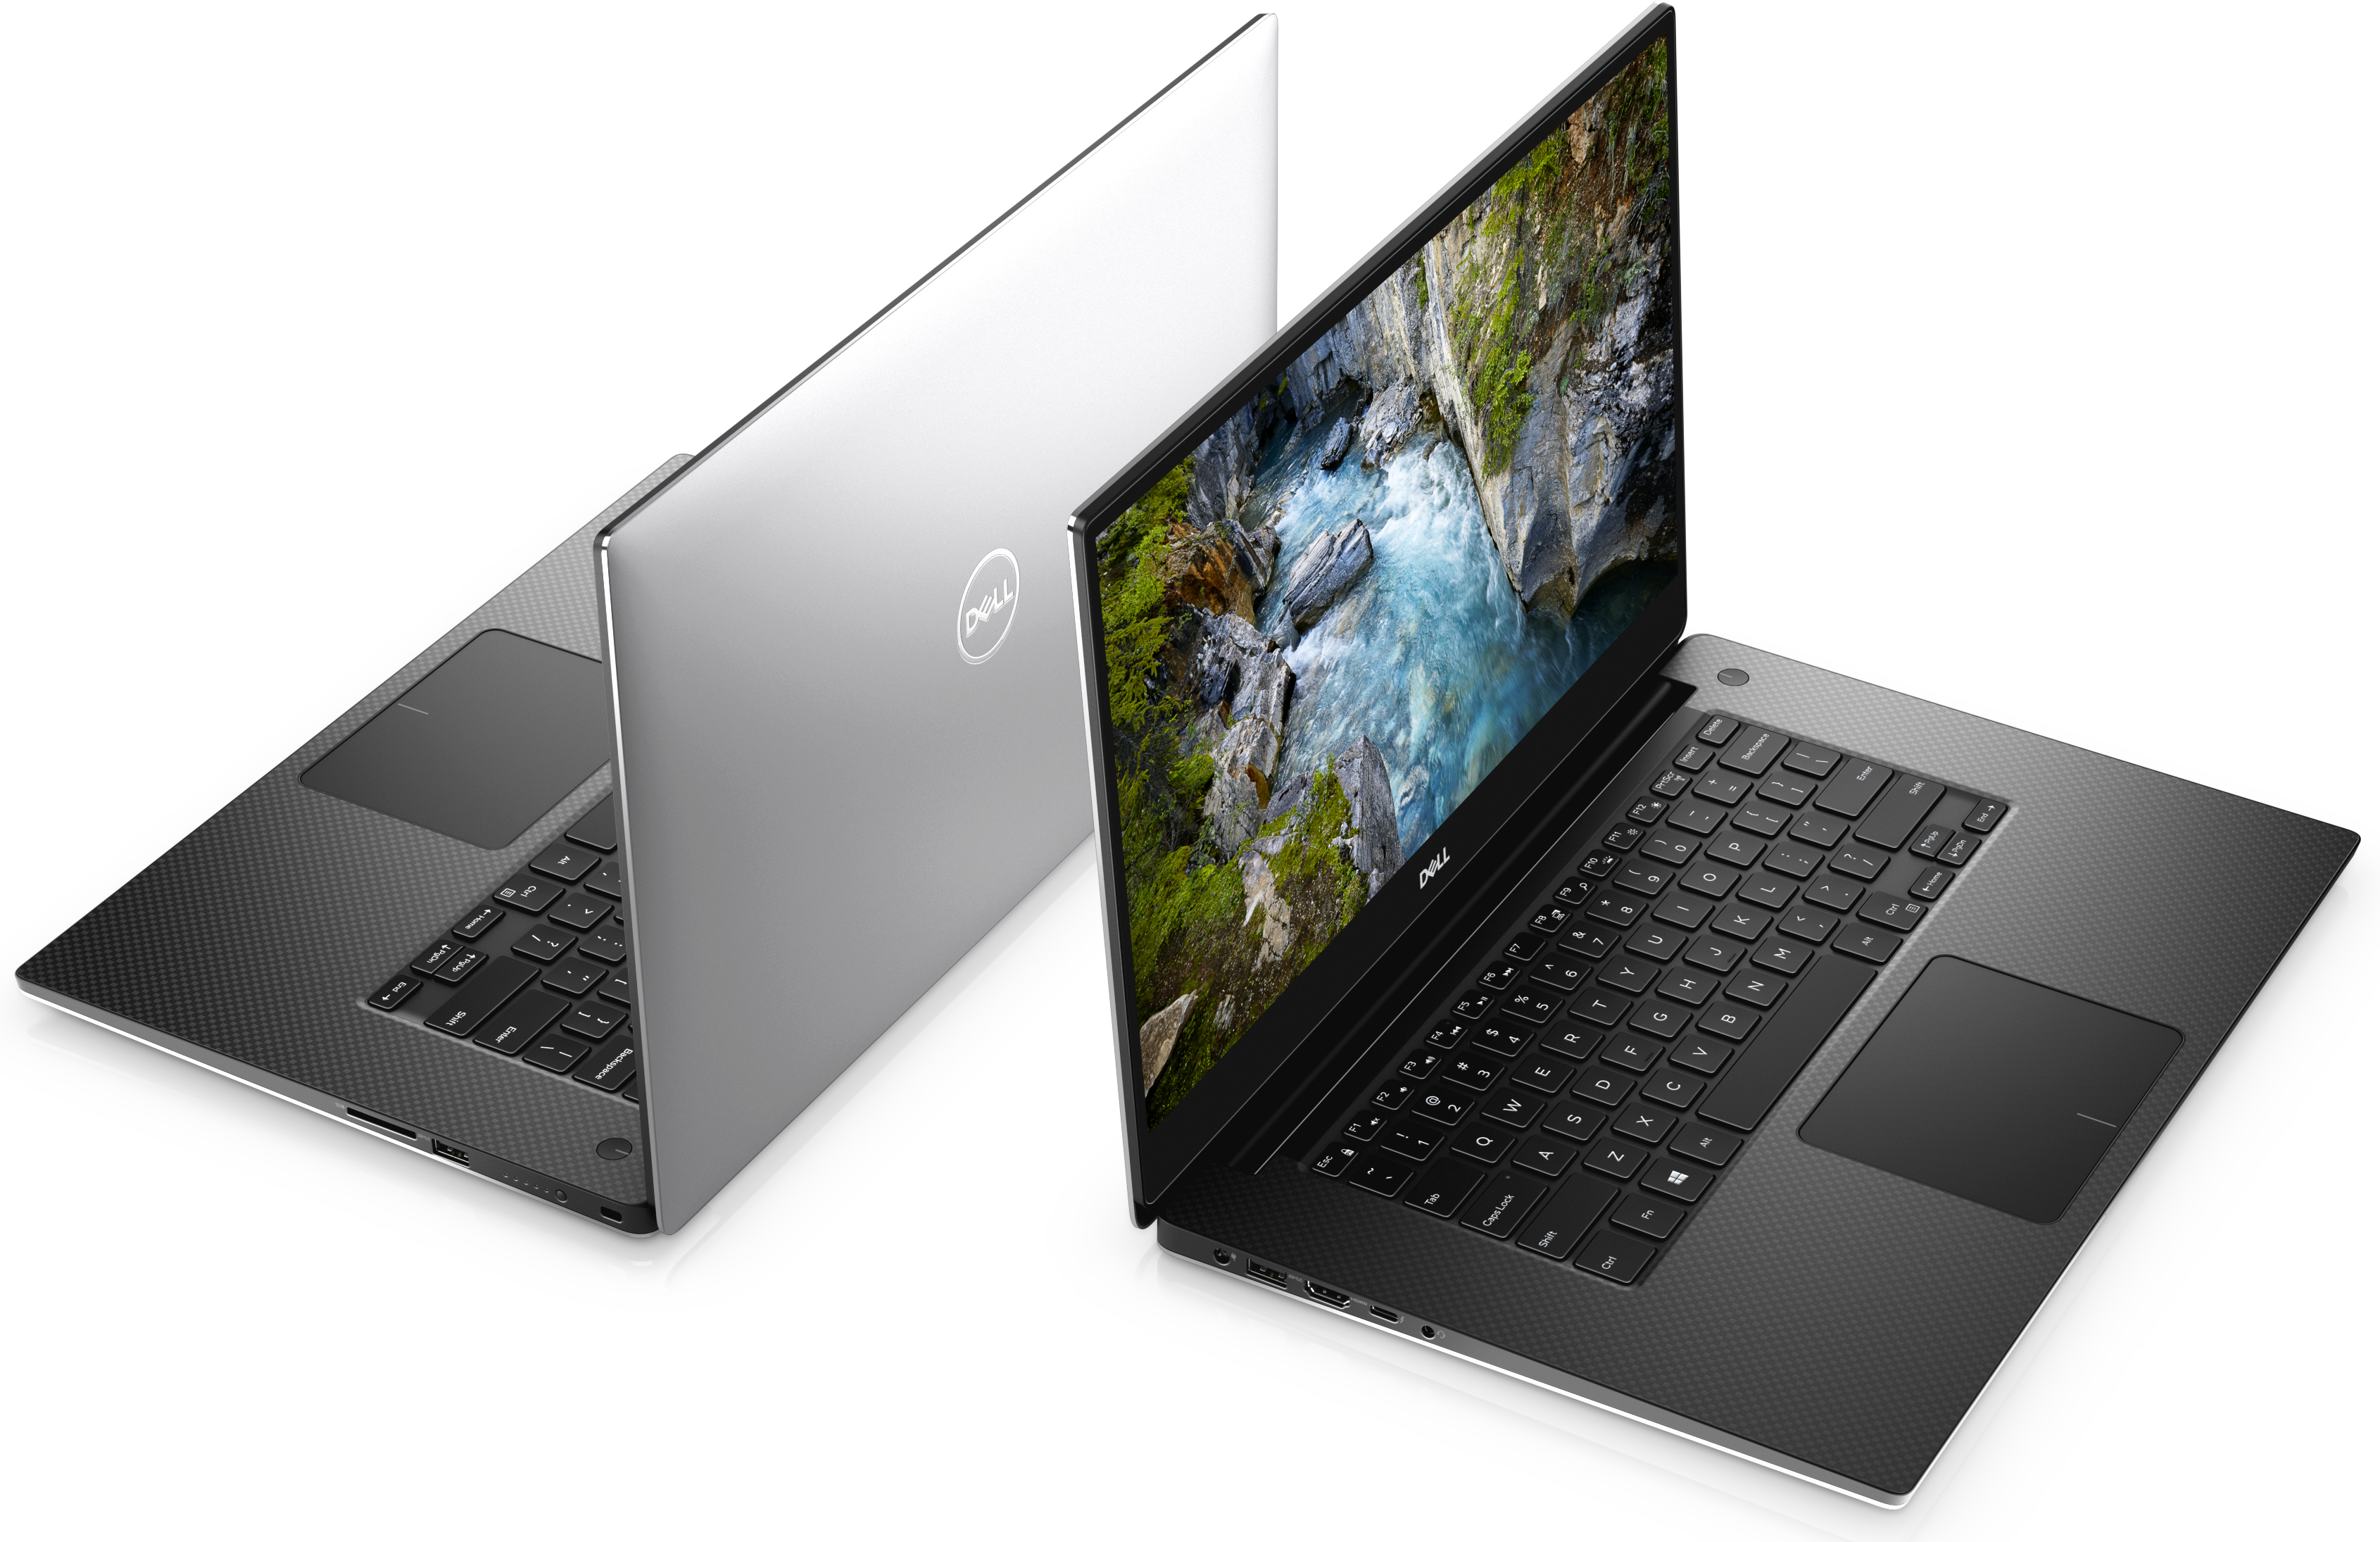 dell xps 15 all in one